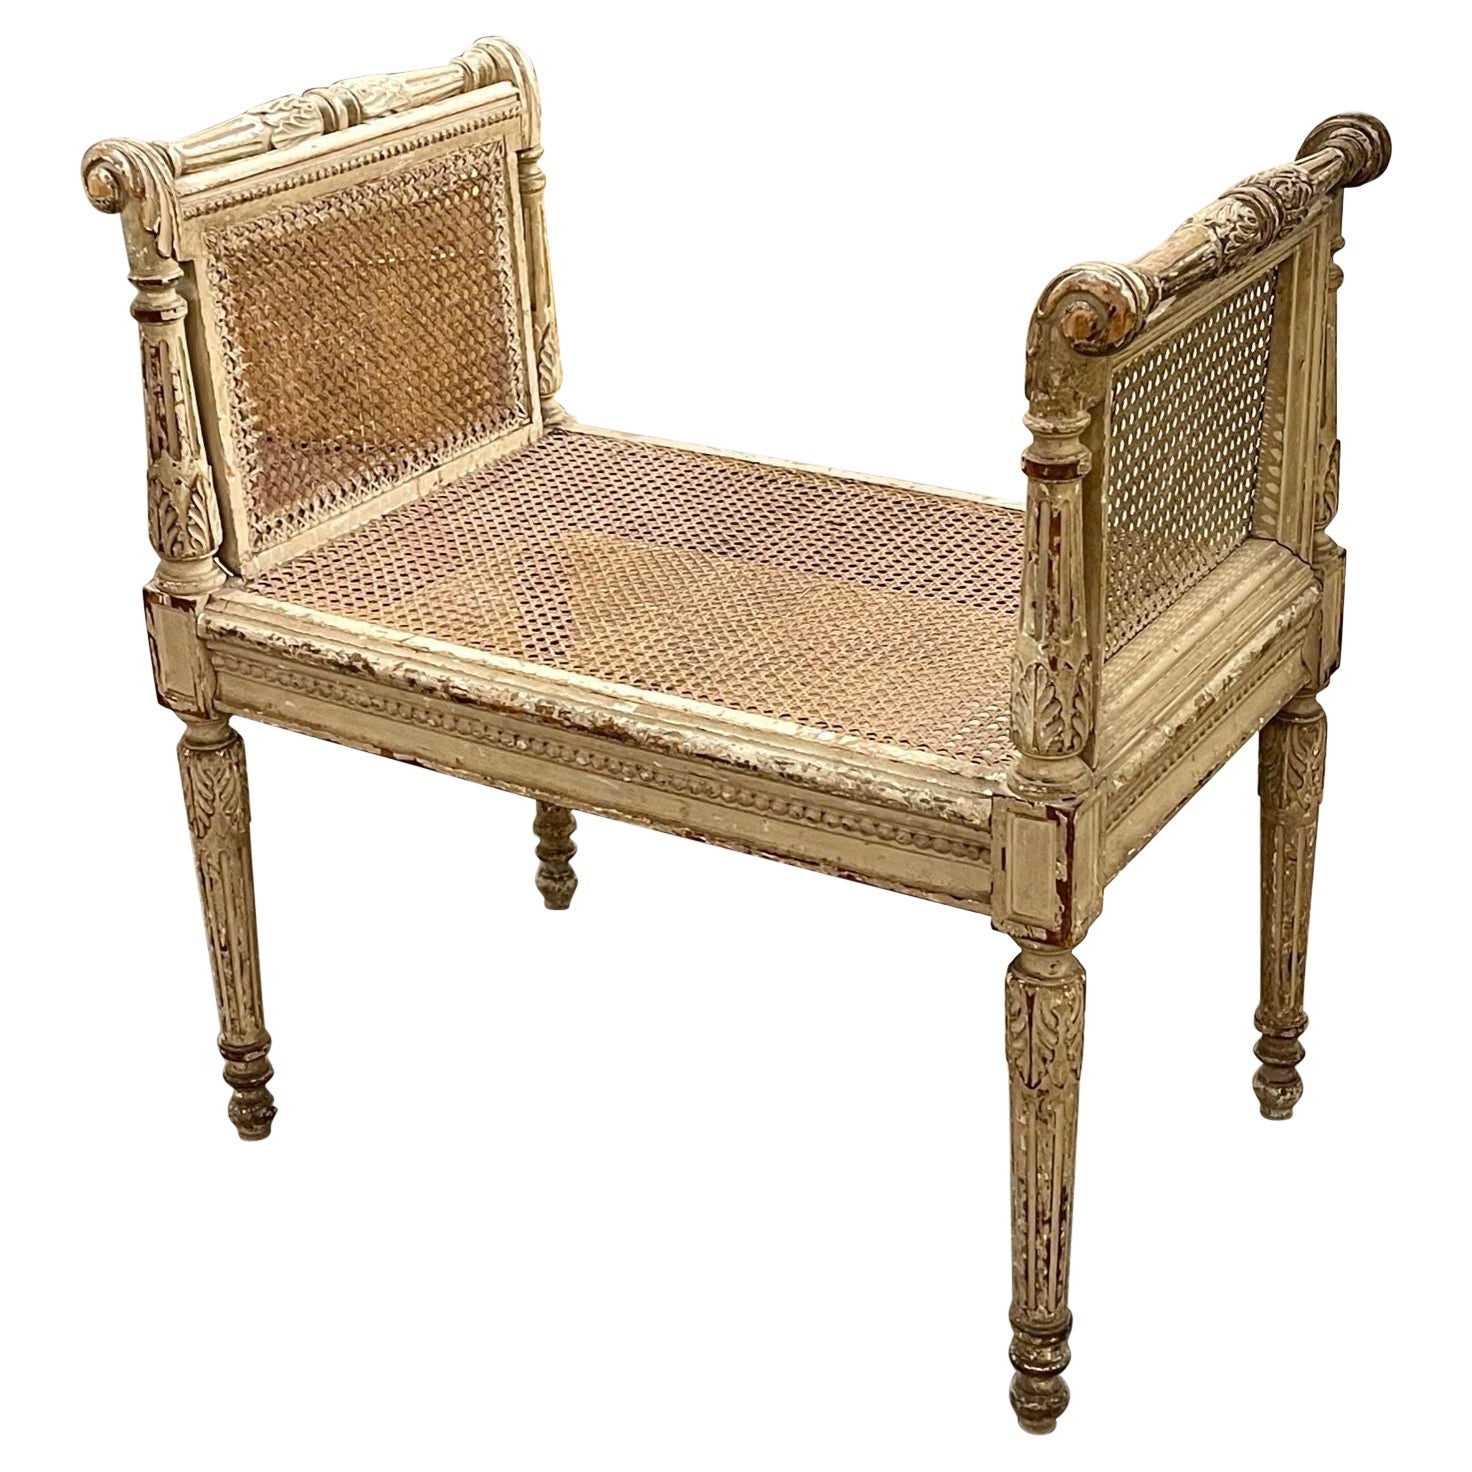 19th Century French Louis XVI Style Carved and Painted Vanity Stool For Sale